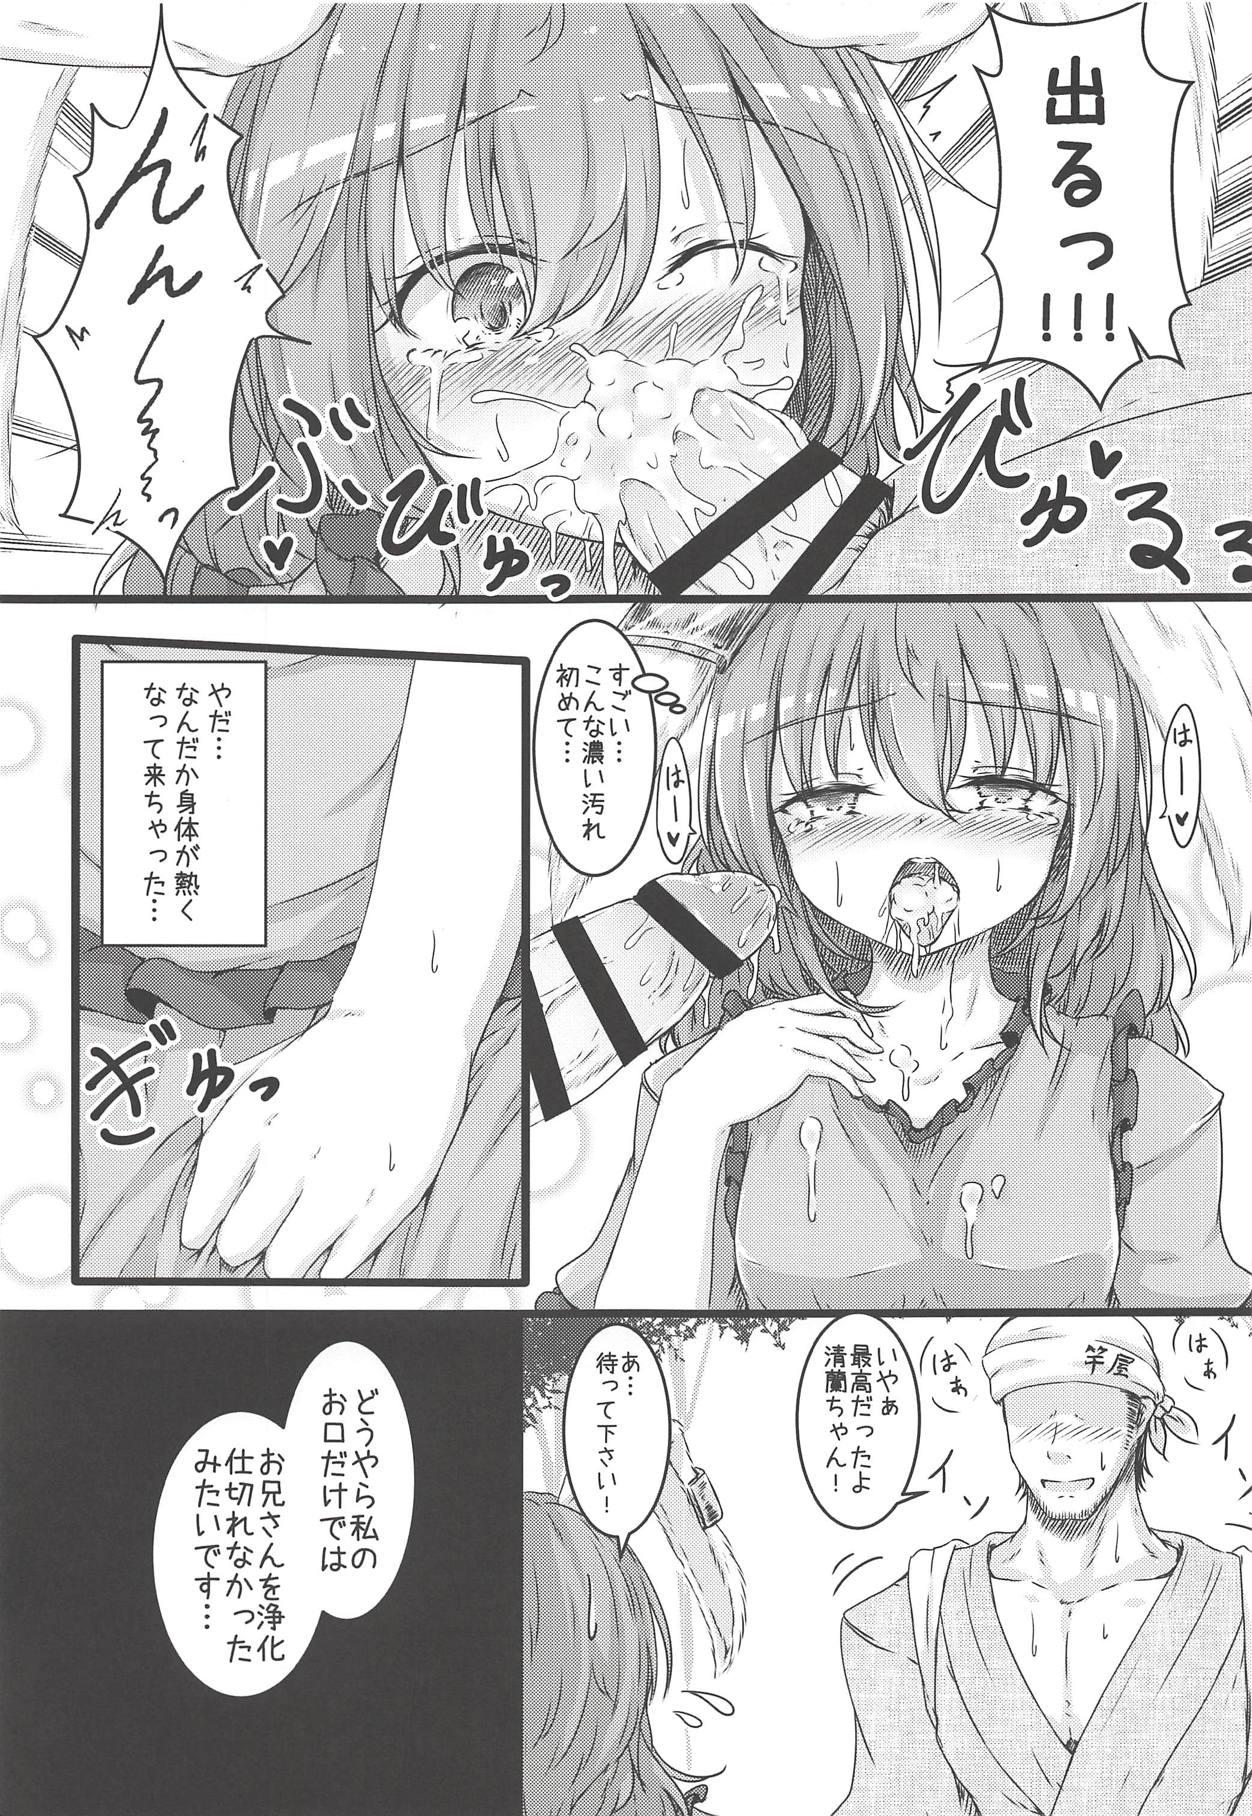 Sloppy Blow Job Green Apple Pie - Touhou project Hogtied - Page 8